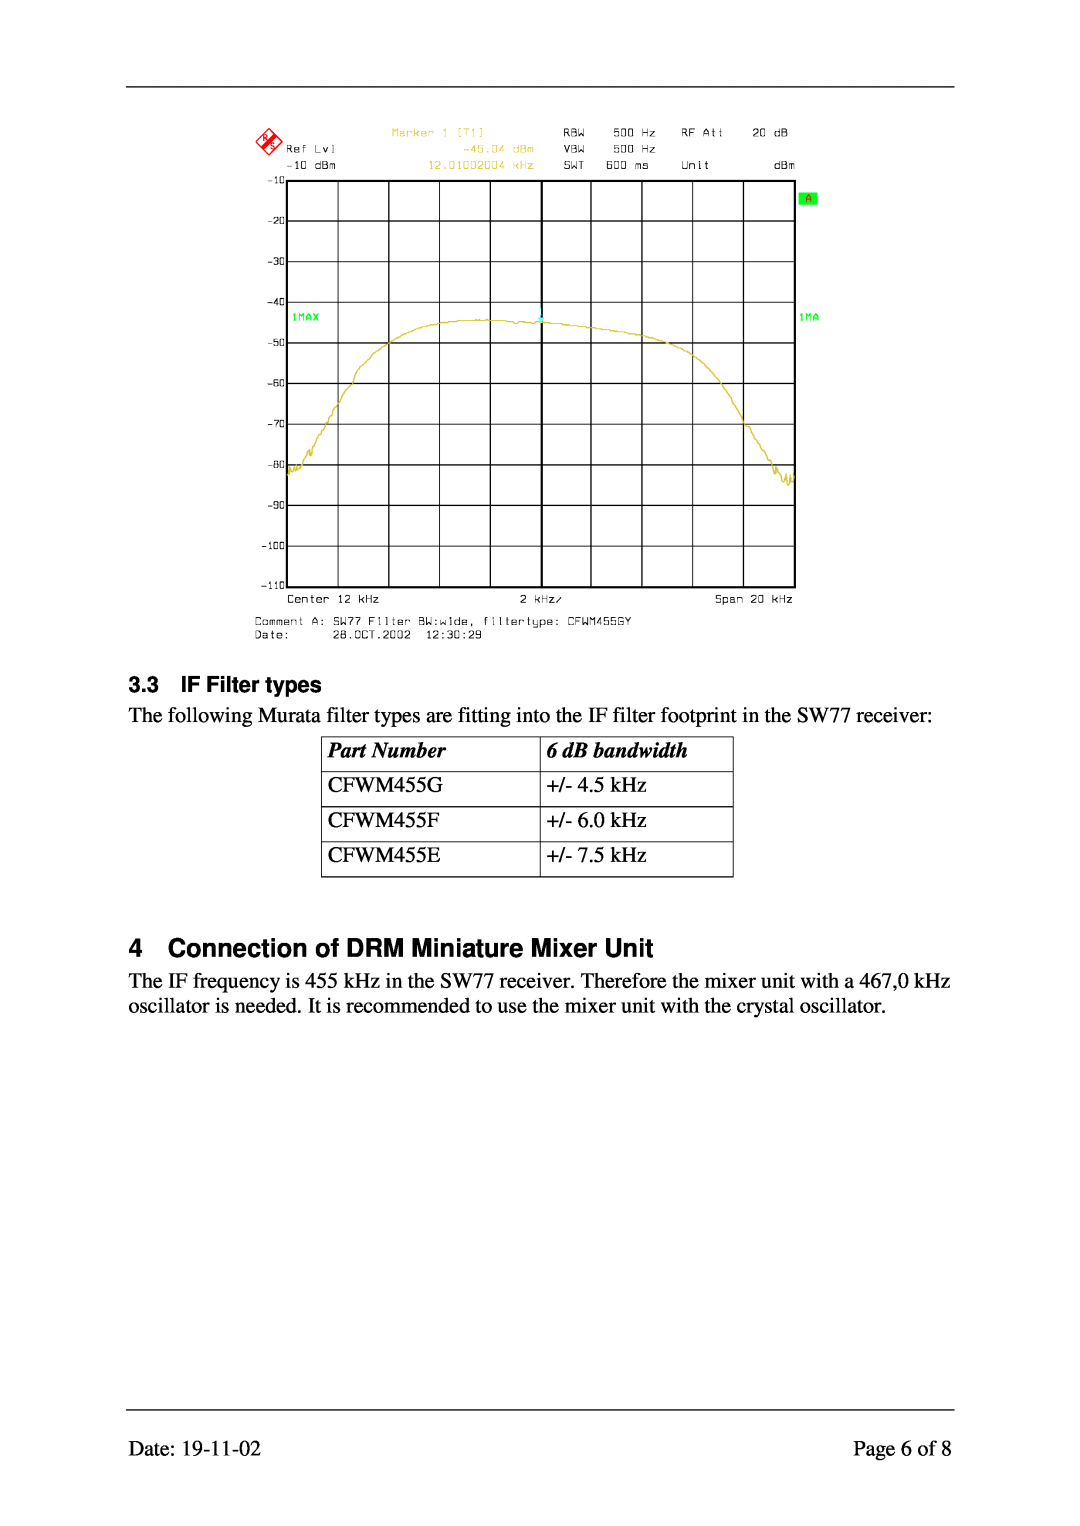 Sony ICF-SW77 manual Connection of DRM Miniature Mixer Unit, 3.3IF Filter types, Part Number, dB bandwidth 